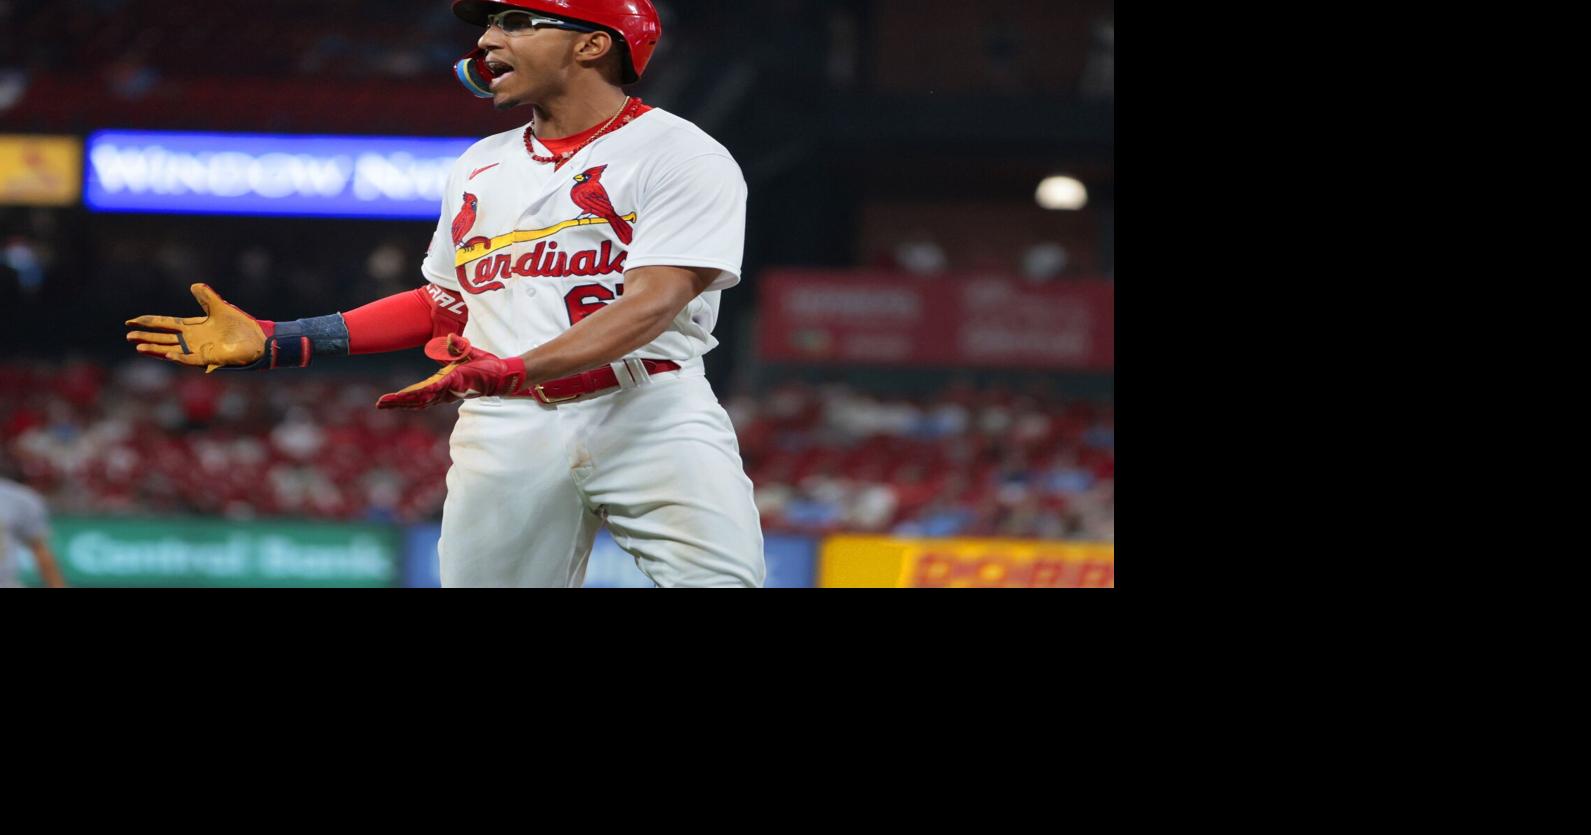 Cardinals' offense scores 11 in first three innings to dash the